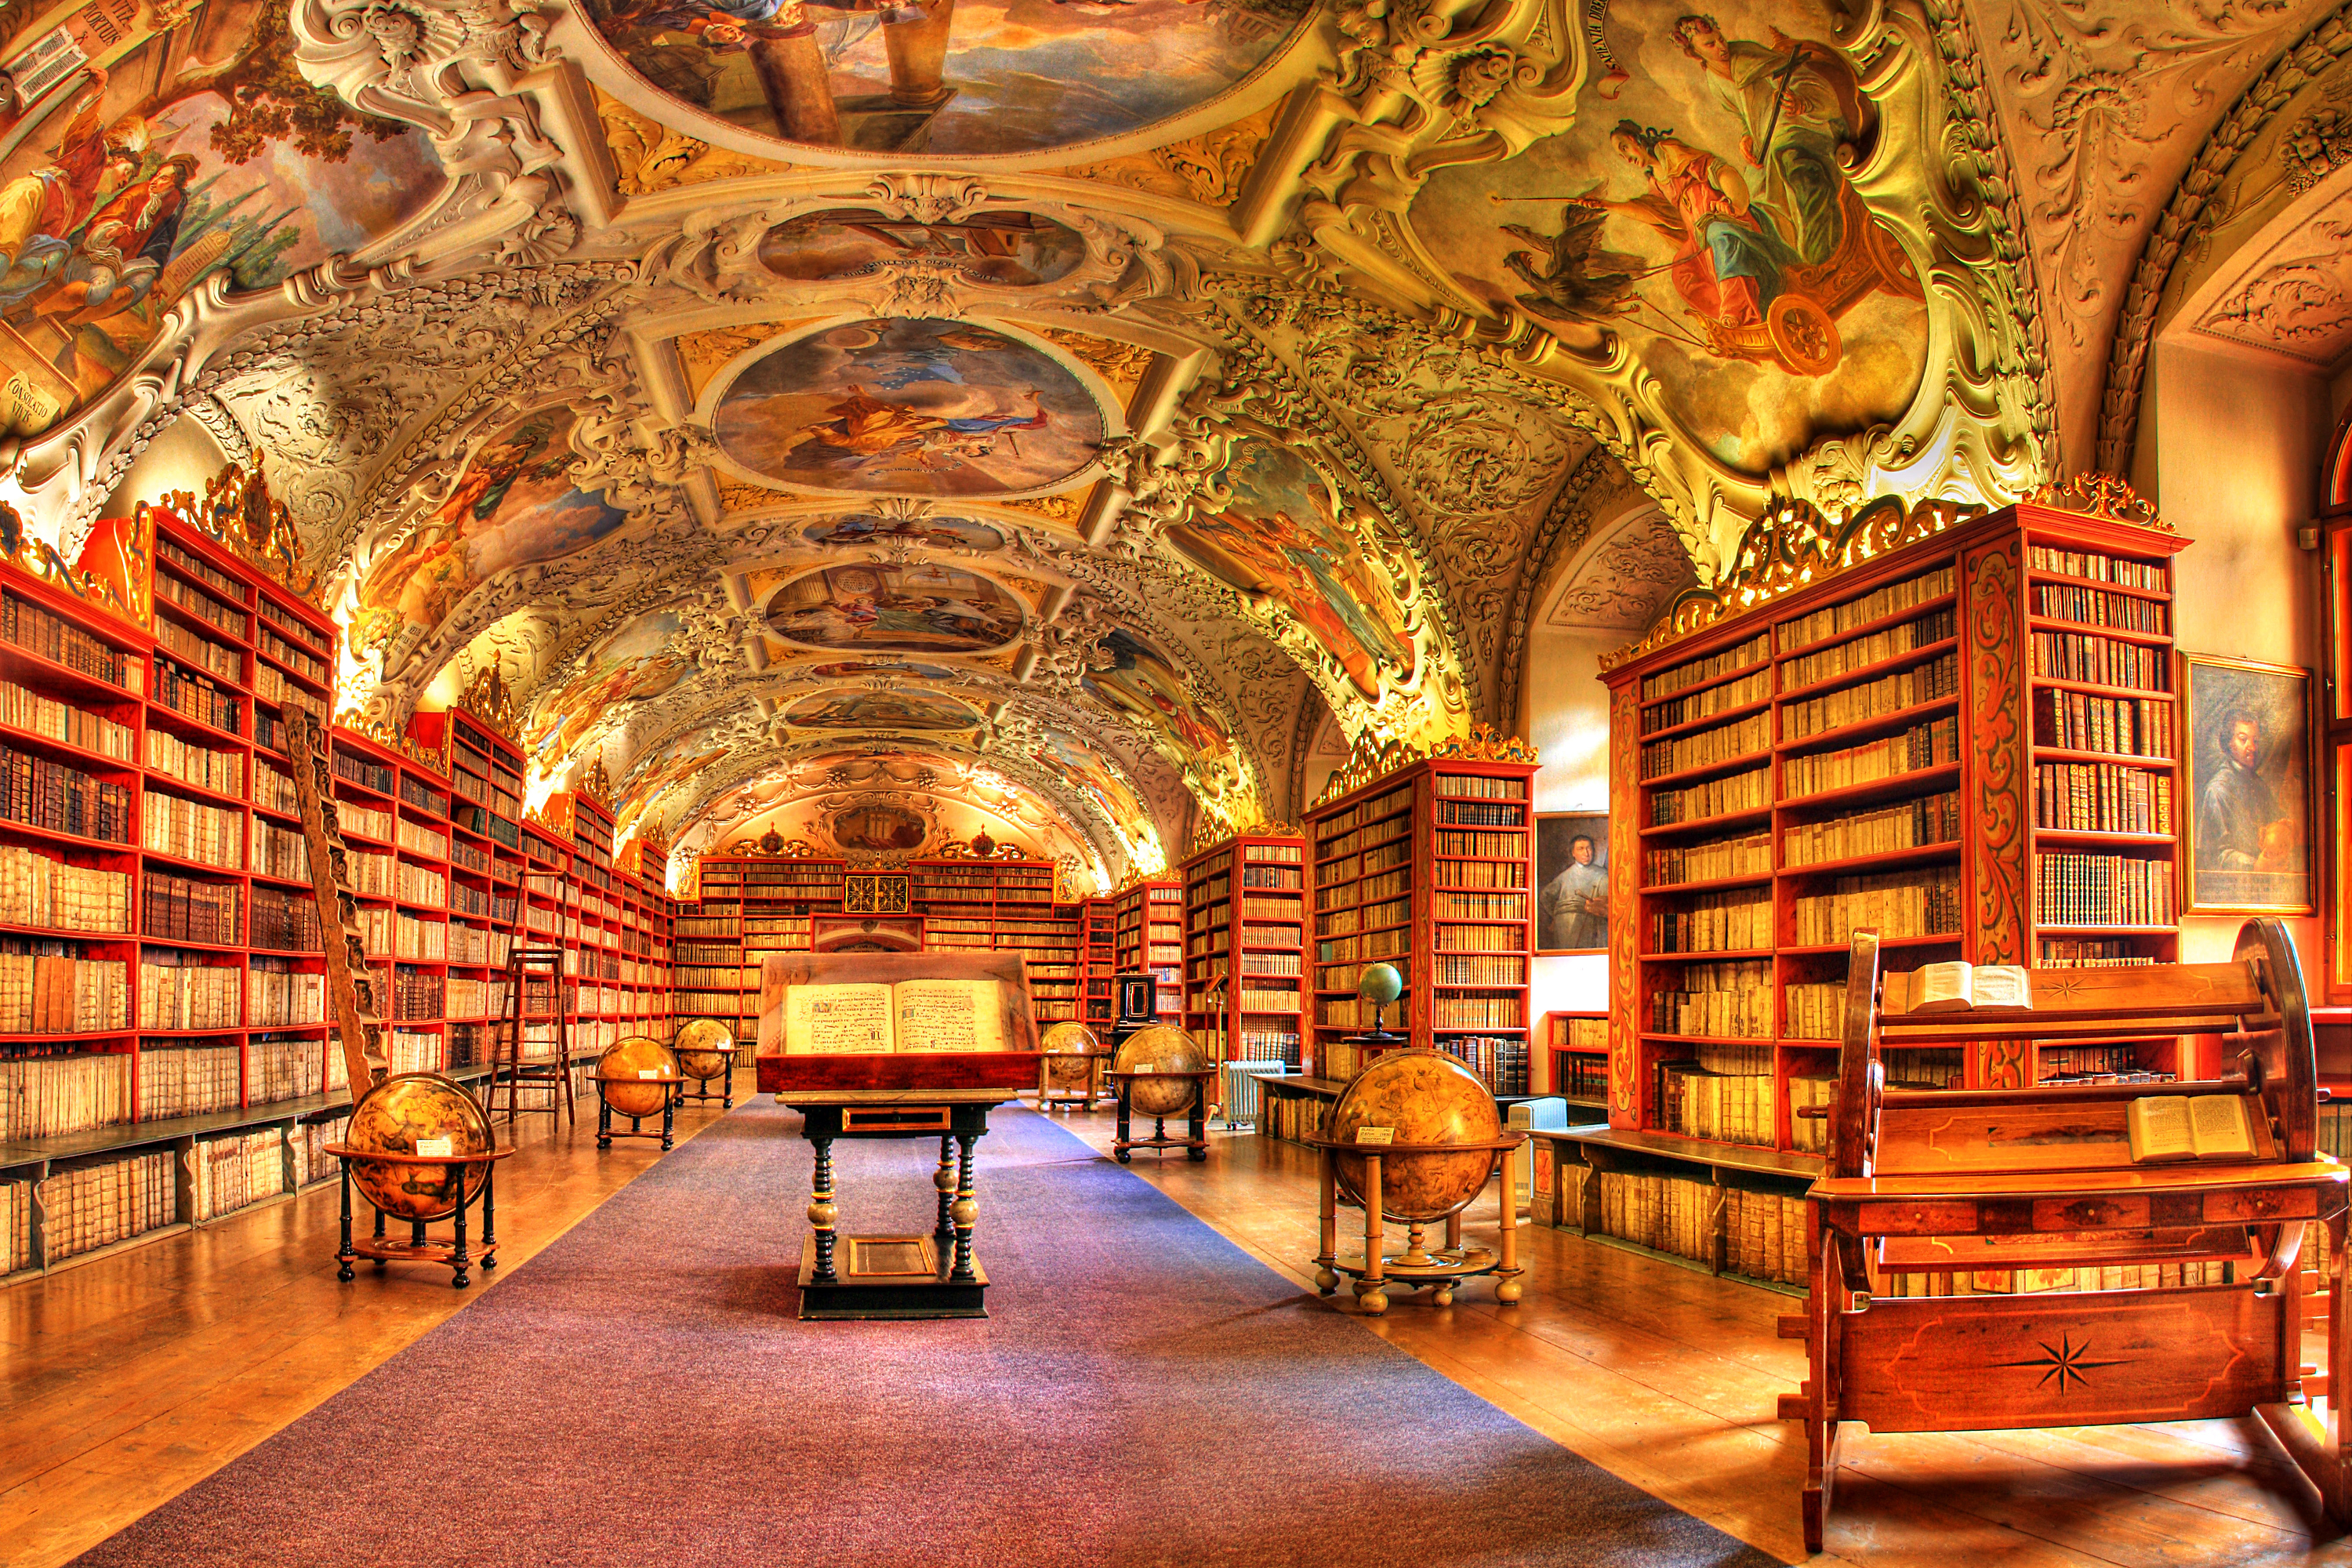 Architecture Globe Library Mural Painting 3000x2000